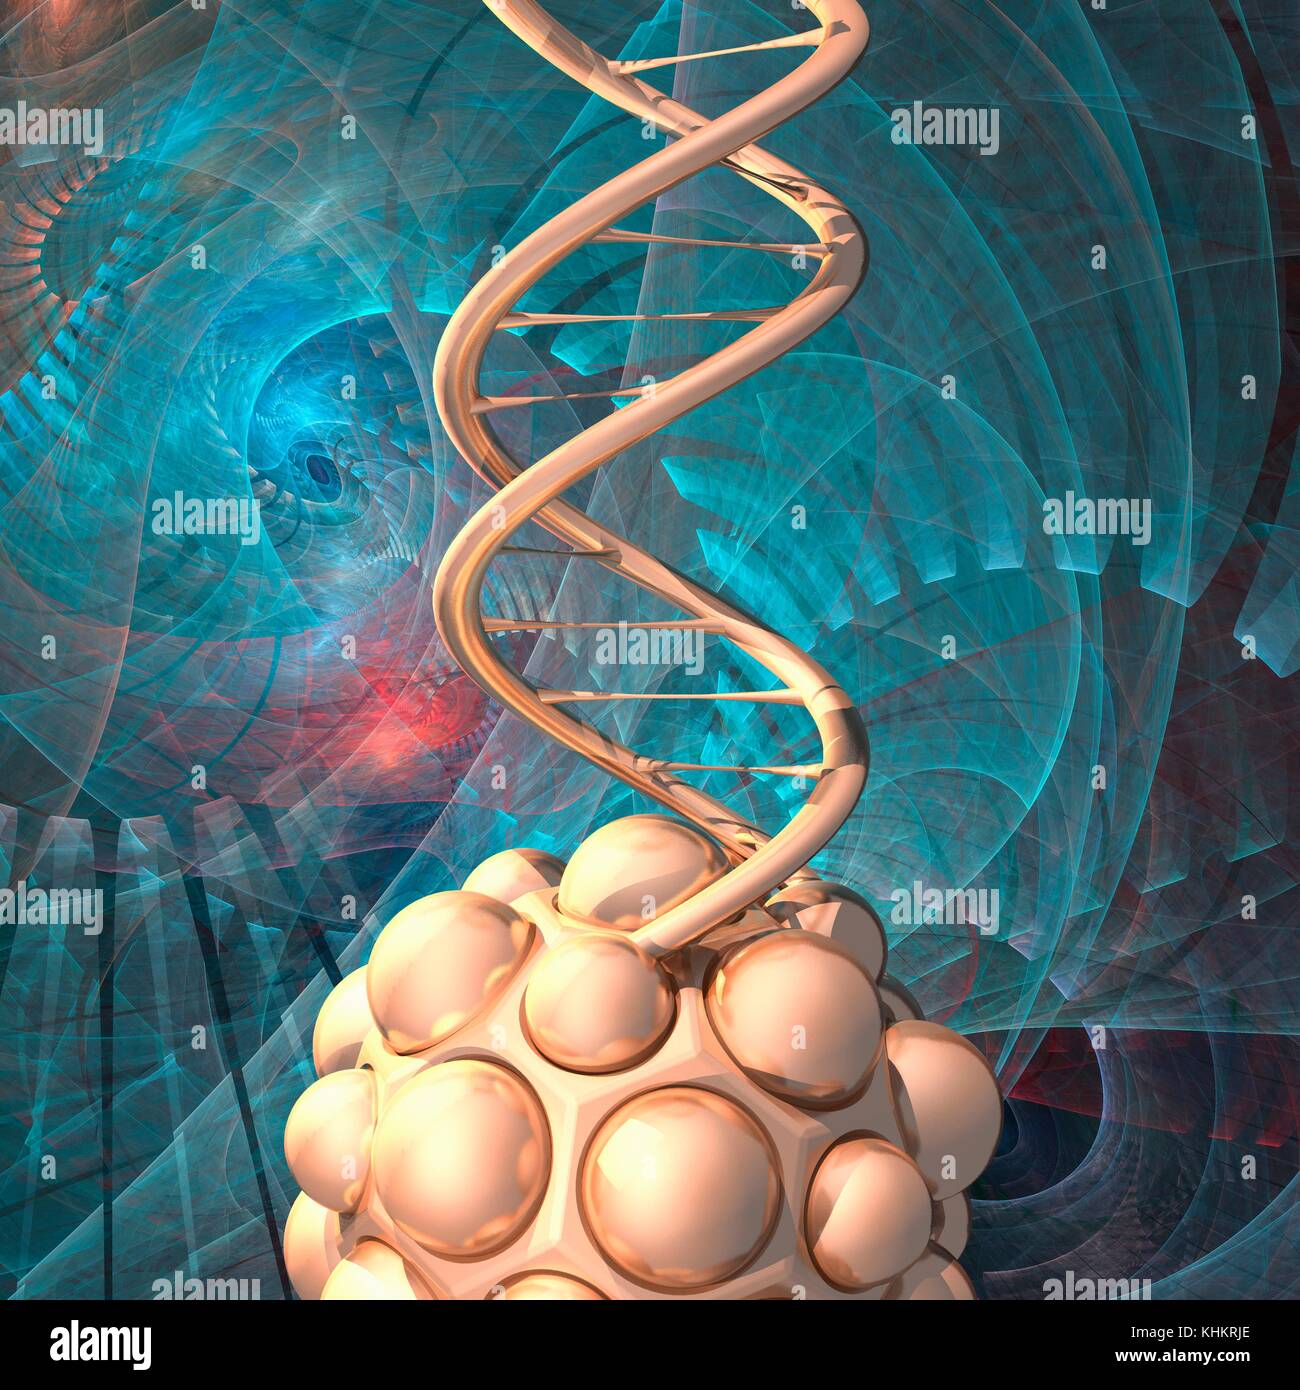 Conceptual illustration of a double stranded DNA (deoxyribonucleic acid) molecule exiting a nanomodule. DNA is composed of two strands twisted into a double helix. Each strand consists of a sugar-phosphate backbone attached to nucleotide bases. There are four bases: adenine, cytosine, guanine and thymine. The bases are joined together by hydrogen bonds. DNA contains sections called genes that encode the body's genetic information. Atoms are represented as spheres and are colour-coded: carbon (grey), nitrogen (blue), oxygen (red) and phosphorus (orange). Stock Photo